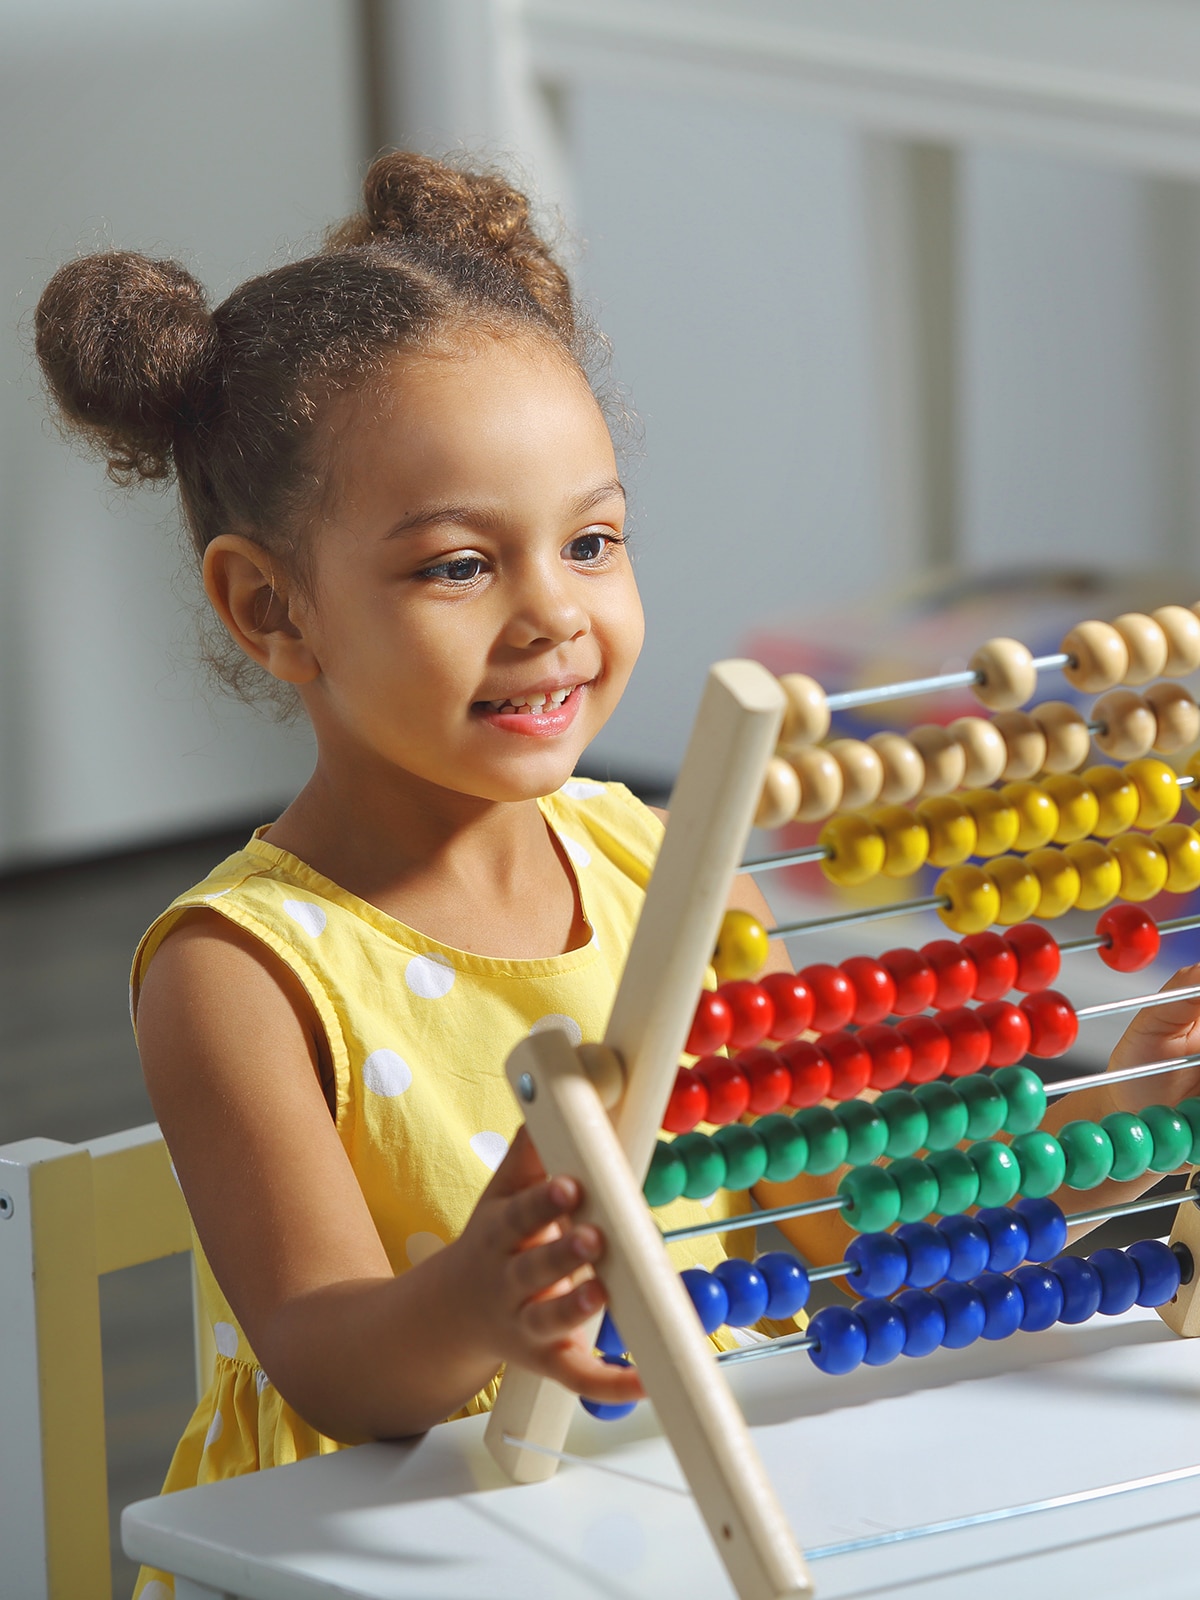 A Fun, Play-Based Curriculum Inspires Growing Little Minds